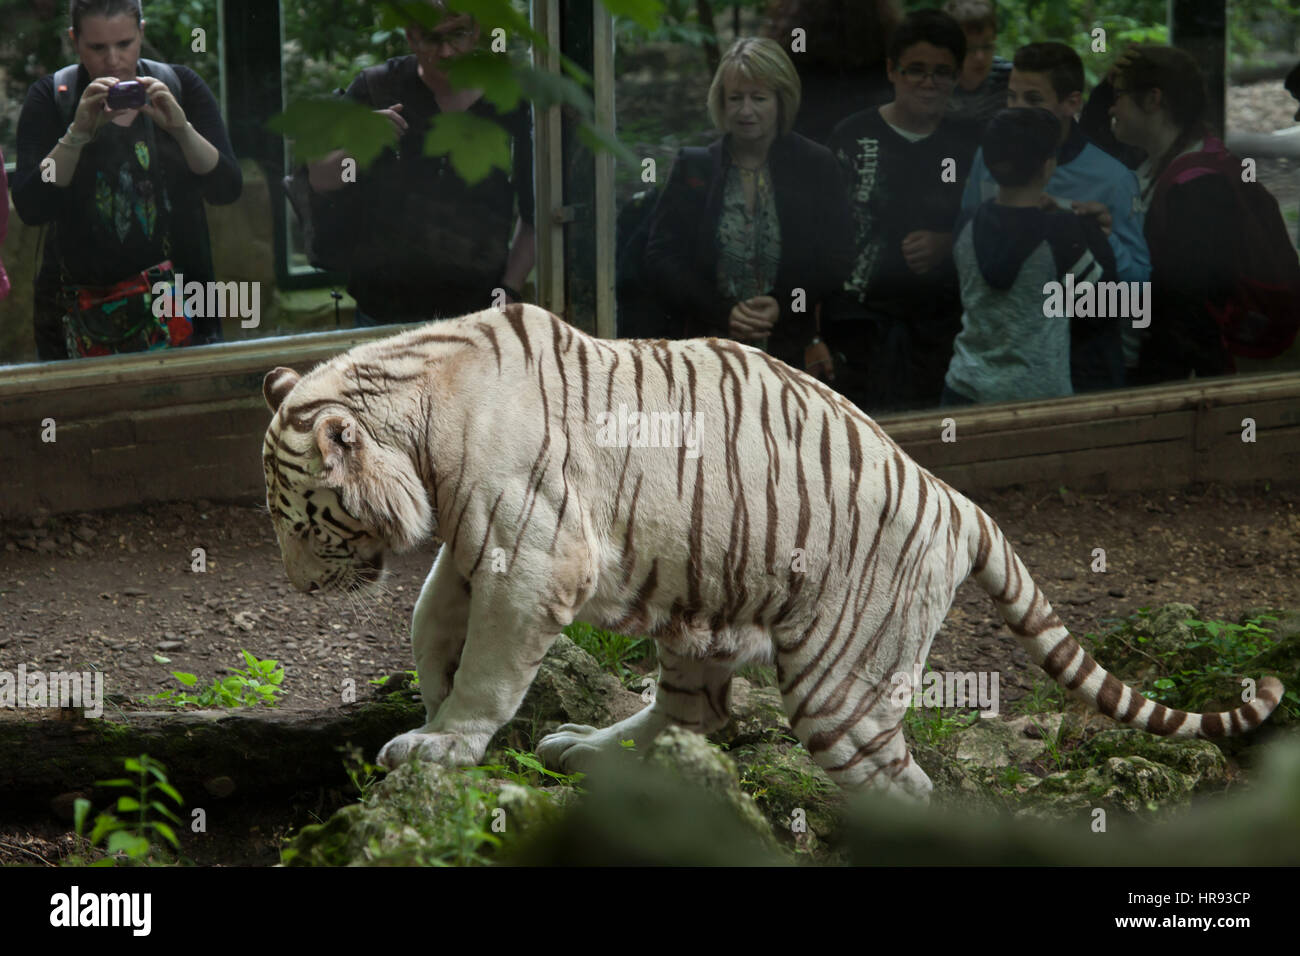 Visitors look as the white tiger (Panthera tigris tigris) walking in its enclosure at Beauval Zoo in Saint-Aignan sur Cher, Loir-et-Cher, France. Stock Photo